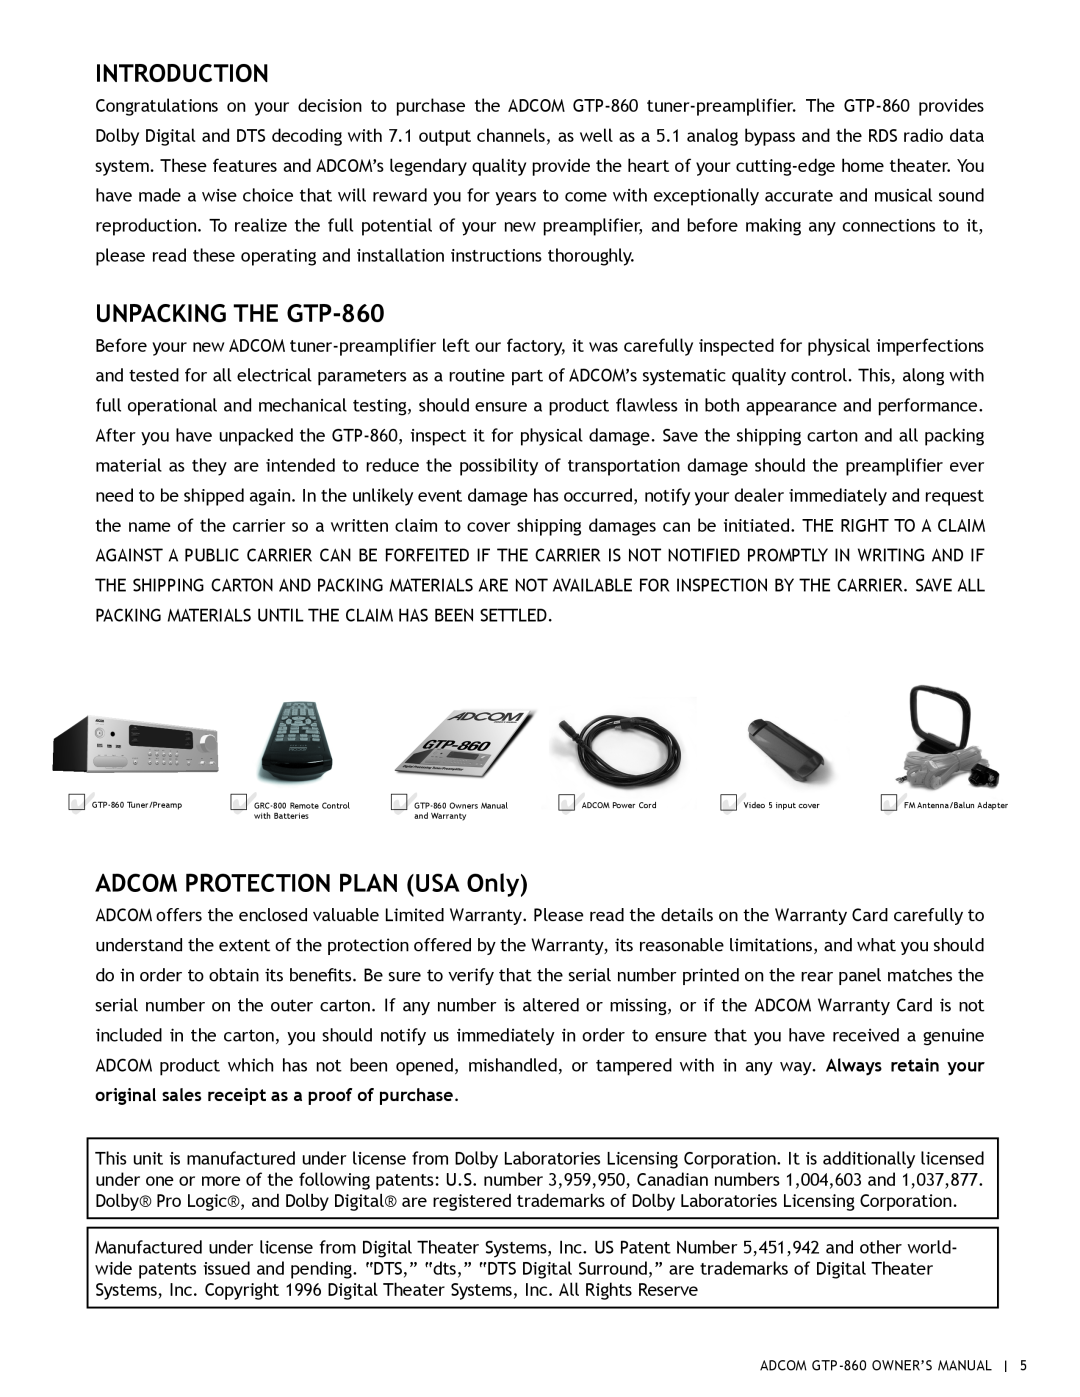 Adcom owner manual Introduction, UNPACKING THE GTP-860, ADCOM PROTECTION PLAN USA Only 